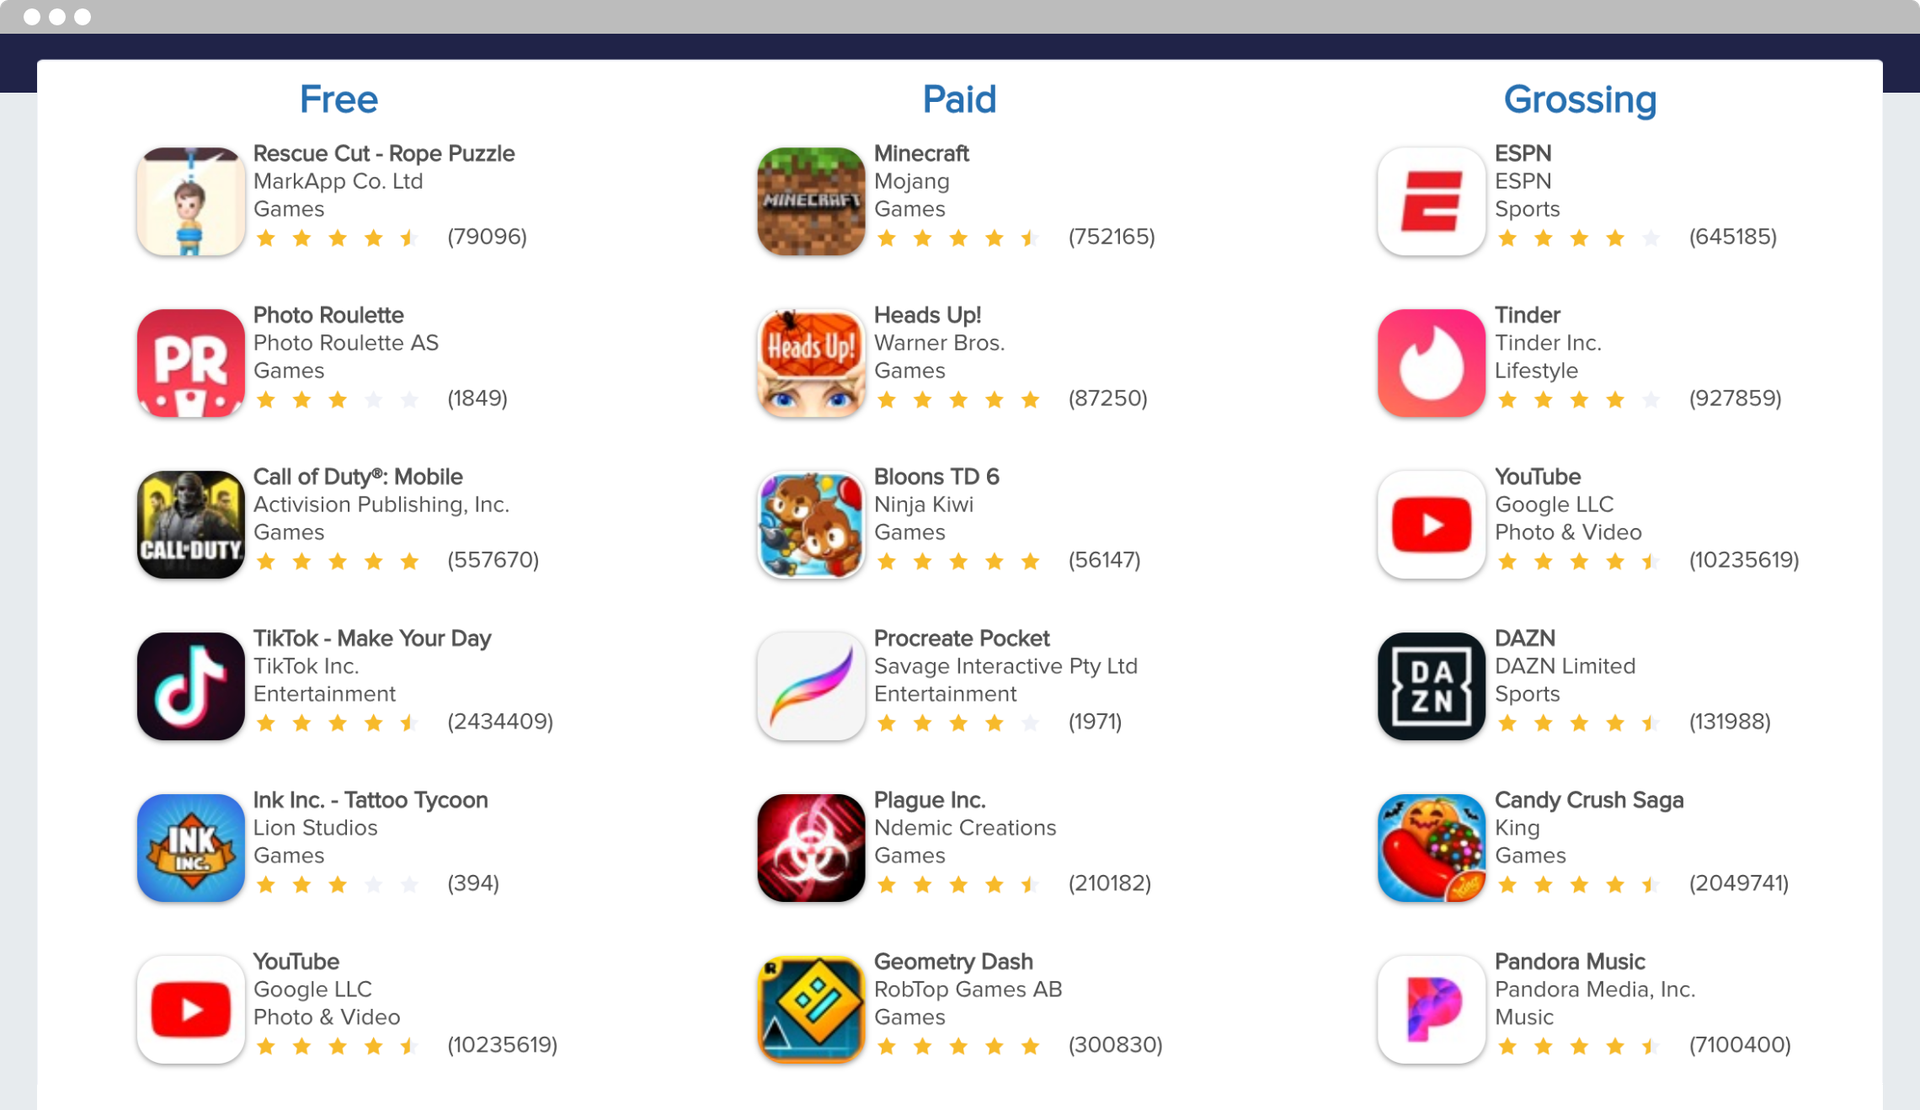 Mobile Action's Biggest Mover and Biggest Loser Apps Tool